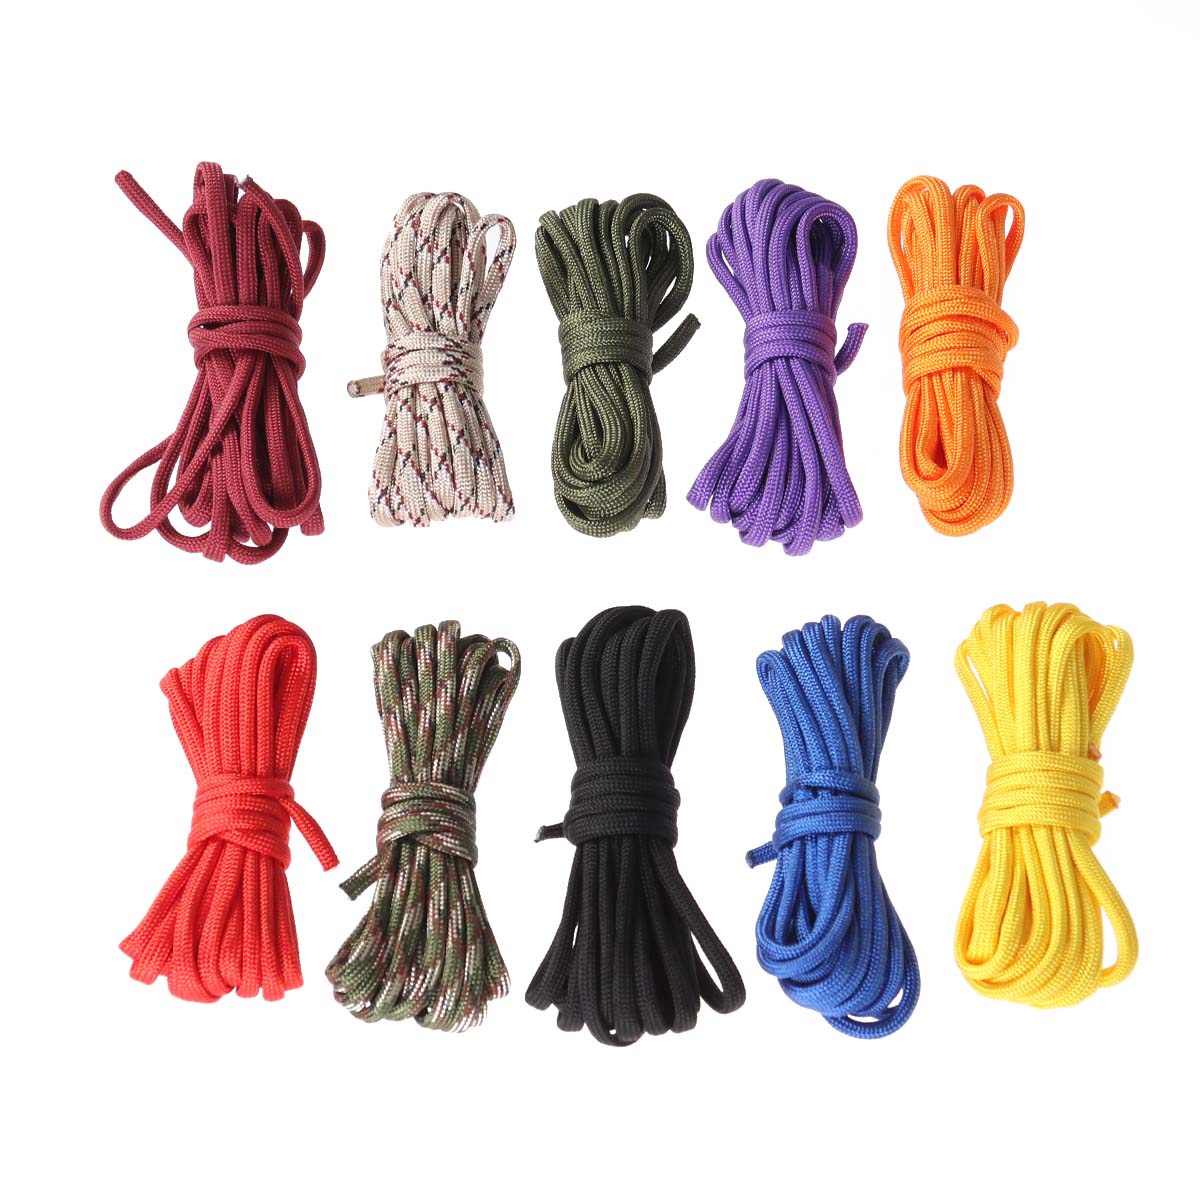 10-pack of 3m Paracord Climbing Ropes